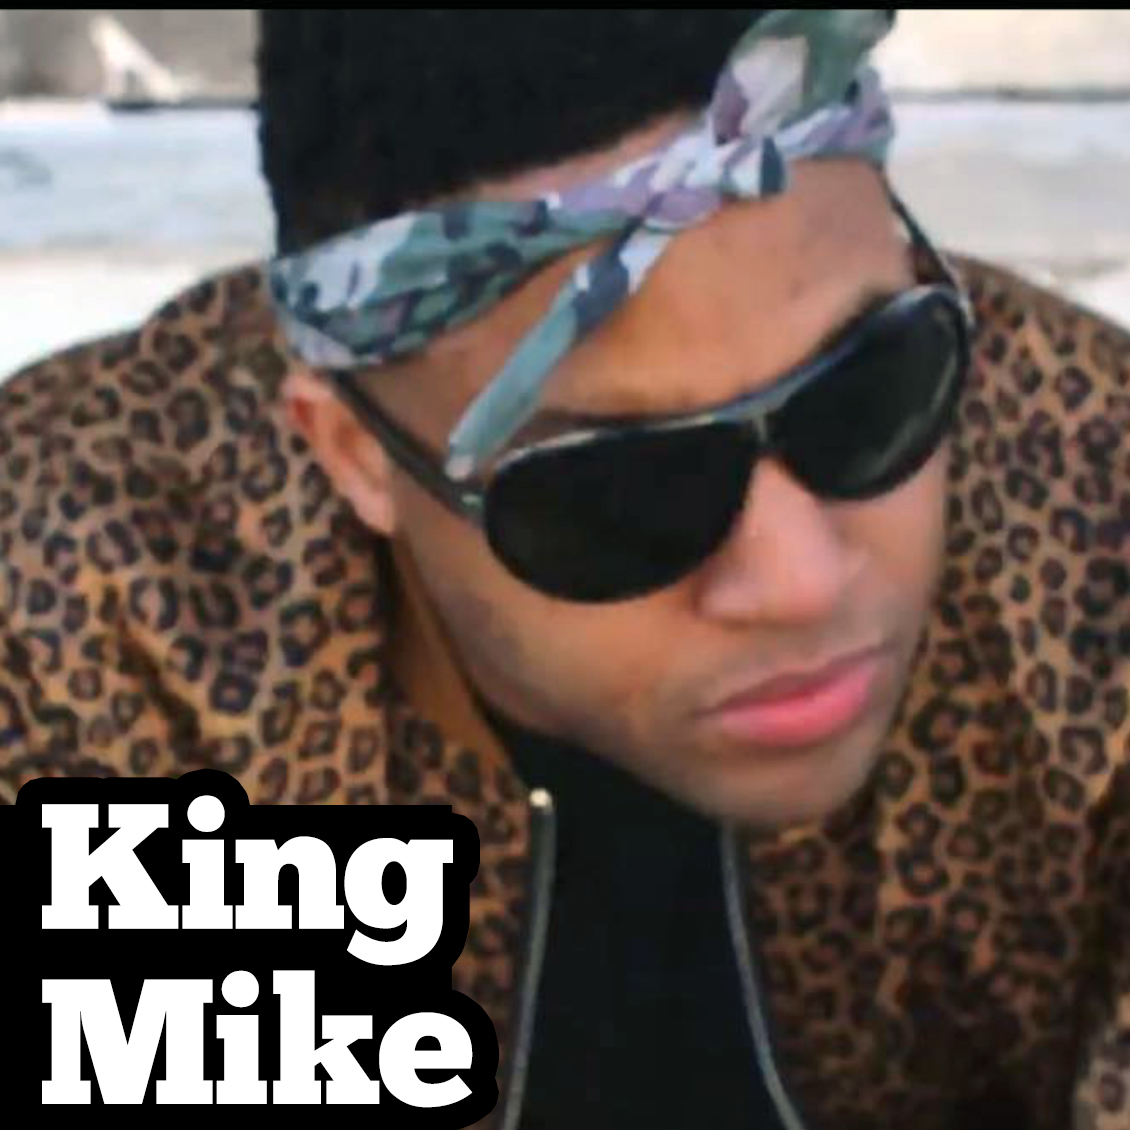 King mike